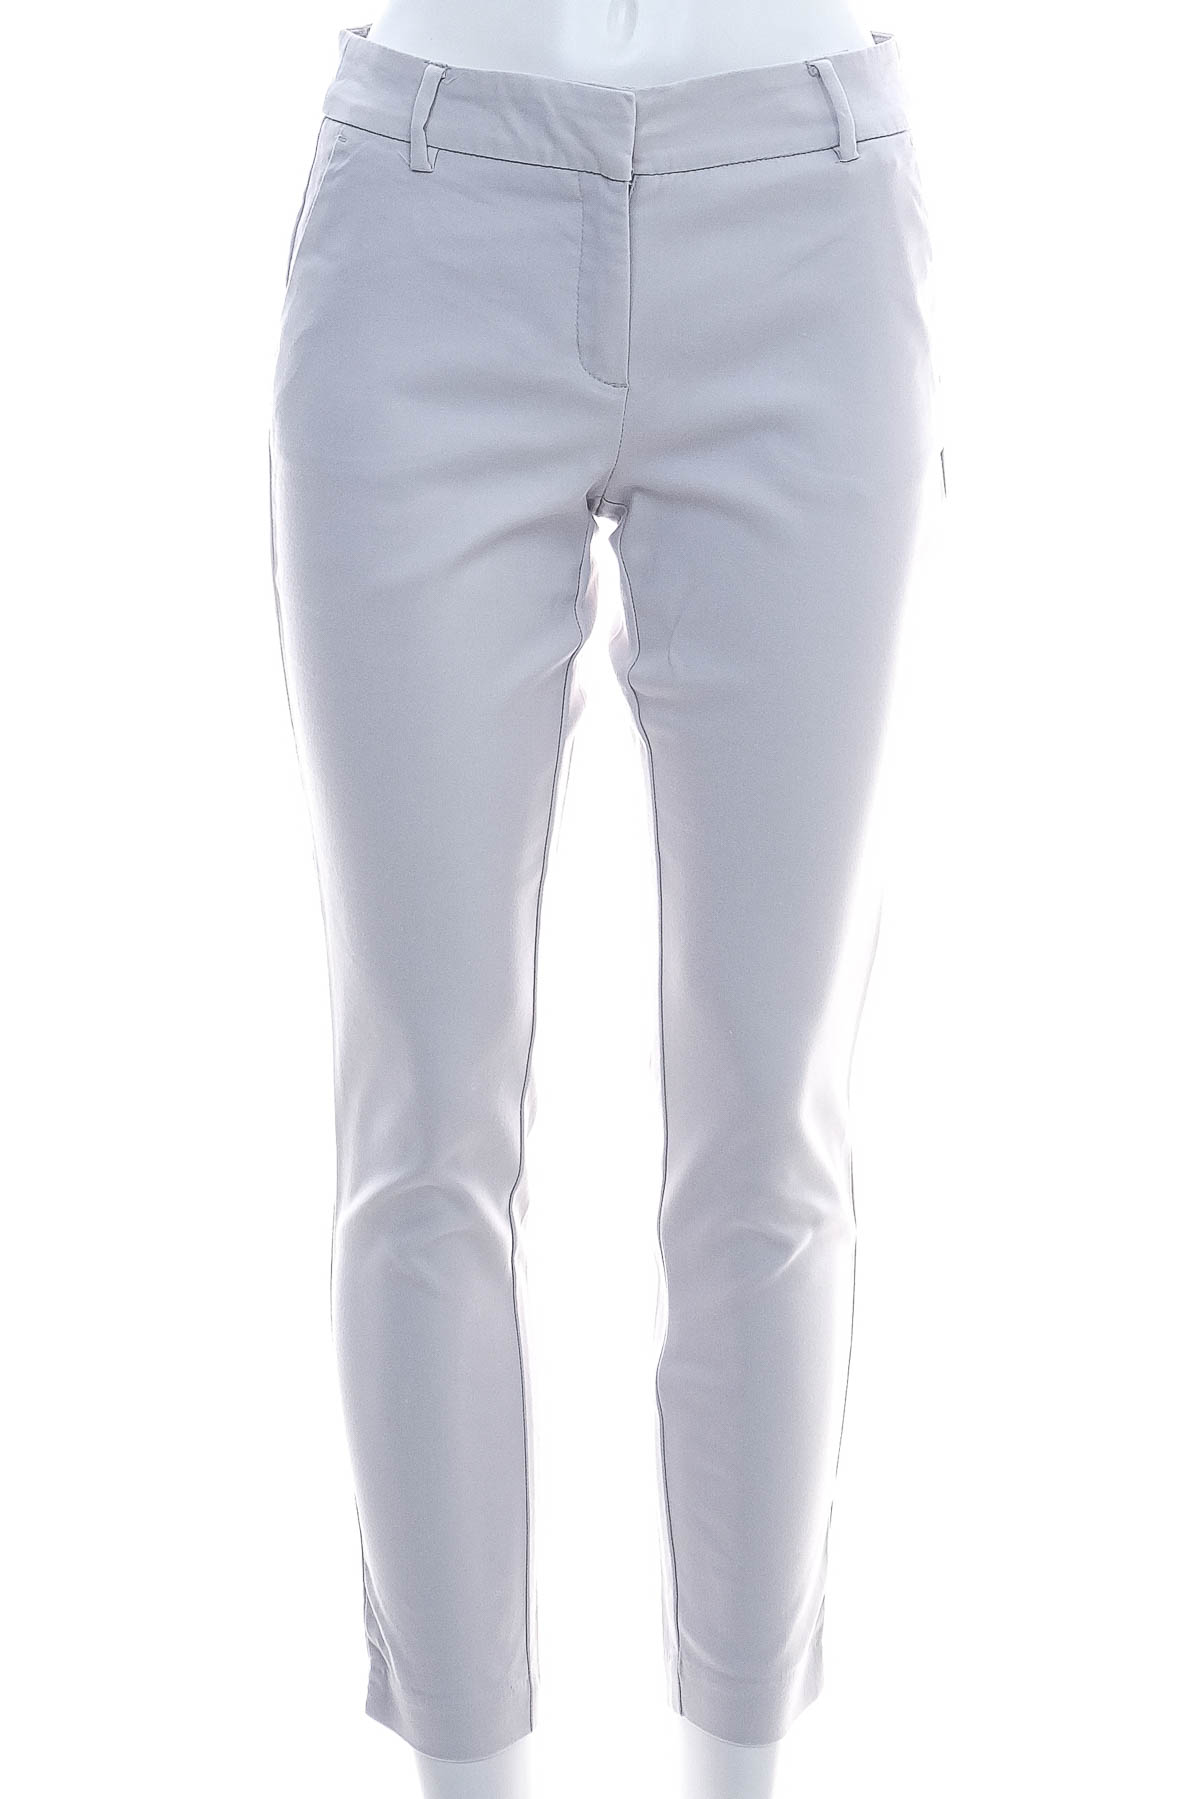 Women's trousers - RESERVED - 0